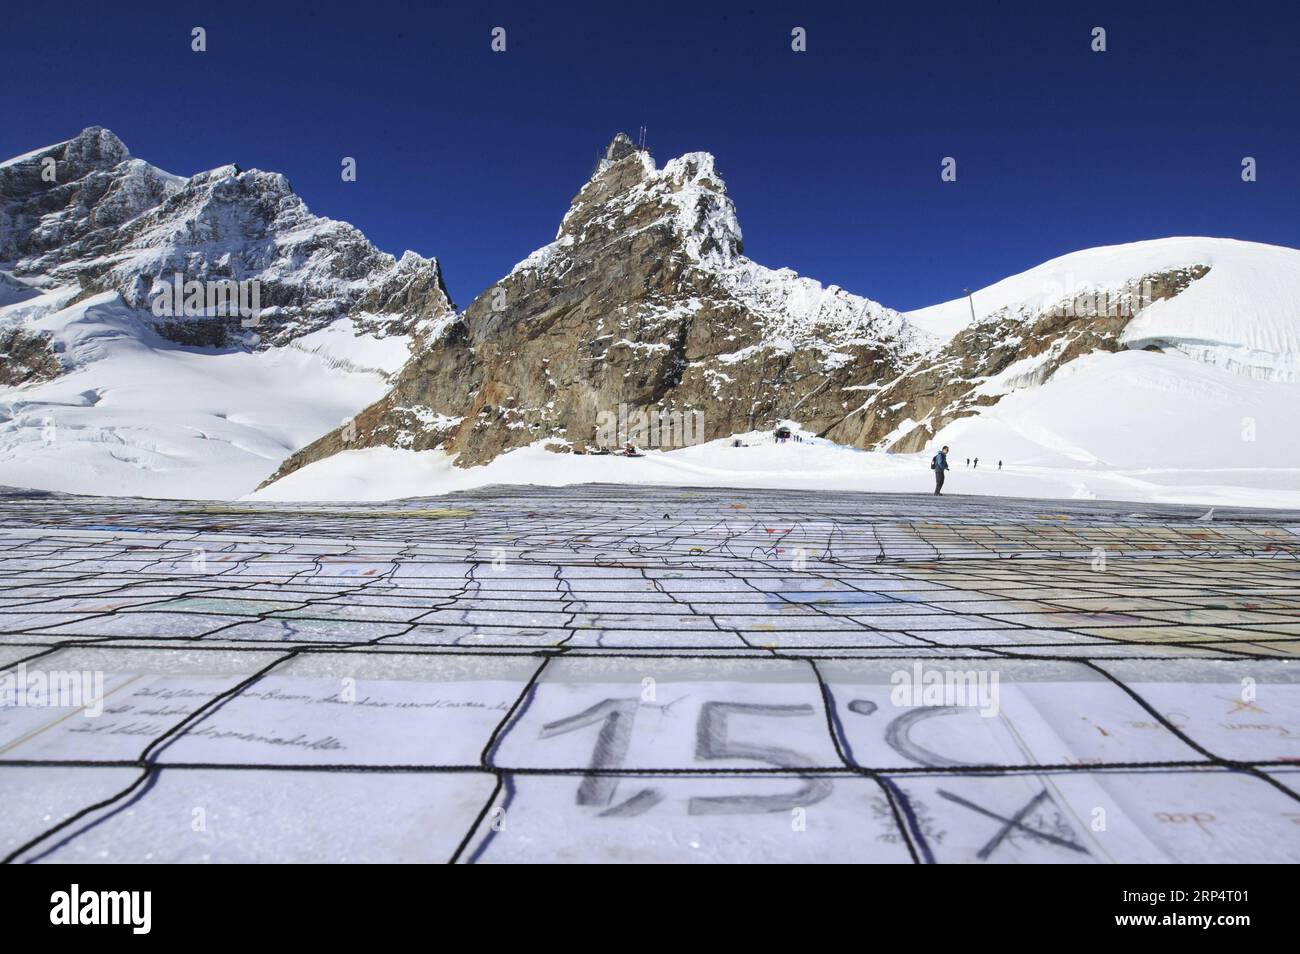 (181116) -- JUNGFRAUJOCH (SWITZERLAND), Nov. 16, 2018 -- A gigantic postcard with the writing of 1.5 degrees Celsius is seen on the Aletsch glacier under Jungfraujoch in Switzerland, on Nov. 16, 2018. The gigantic postcard breaking the Guinness World Records was staged just under the Swiss Jungfraujoch on Friday to raise awareness worldwide of the emergency and necessity to fight climate change. At the center of the postcard was a huge slogan reading STOP GLOBAL WARMING 1.5 ãC to signify the goal of limiting global warming to a maximum of 1.5 degrees Celsius, a target recently set by the Inter Stock Photo